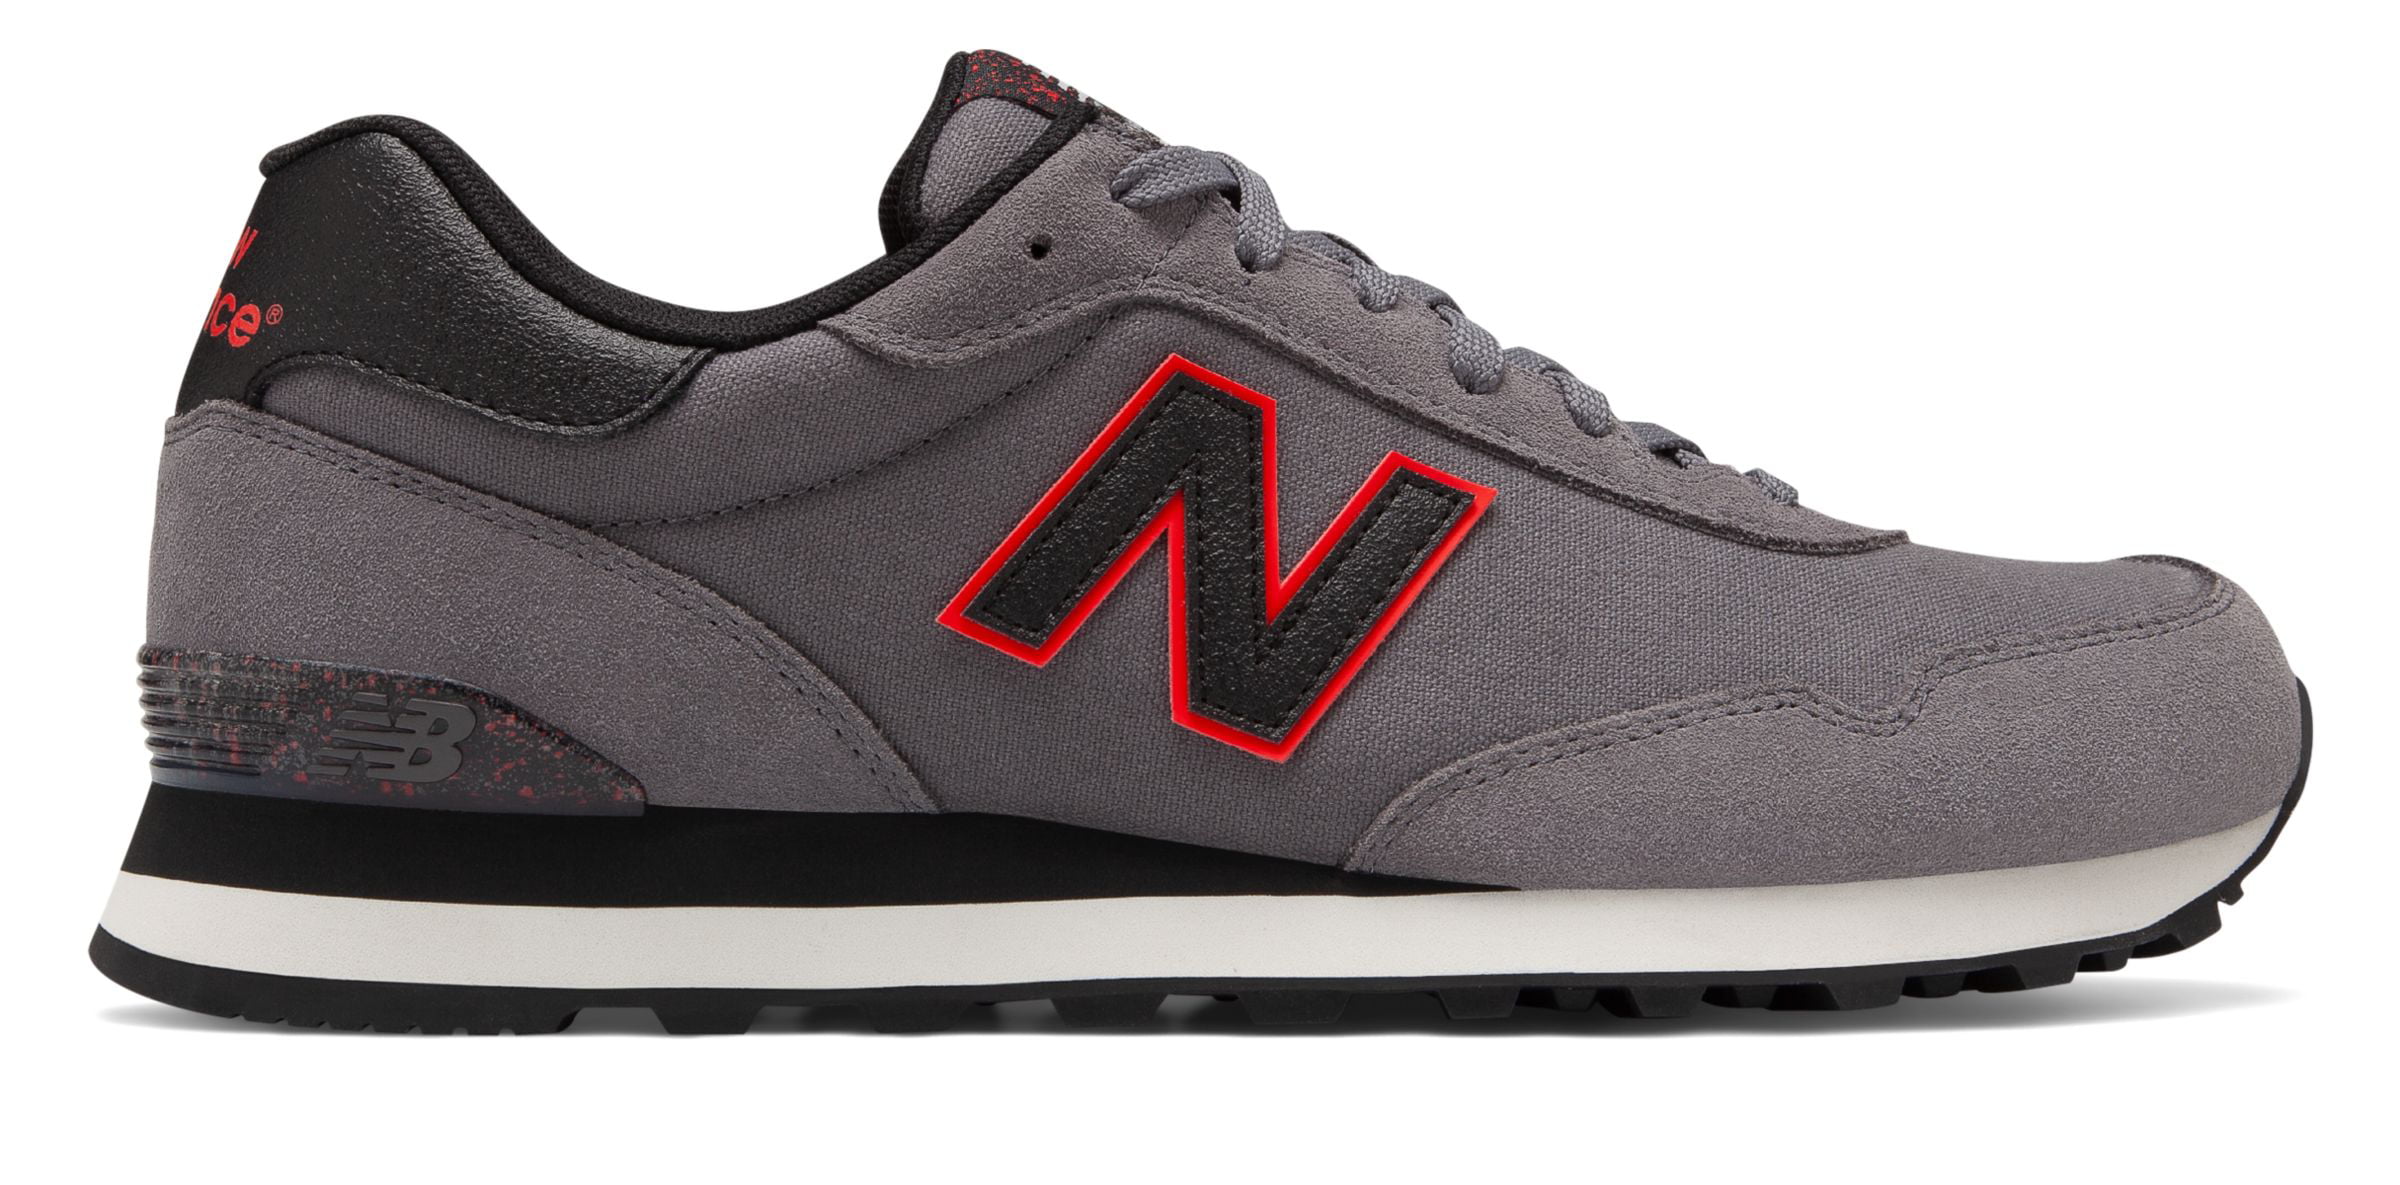 New Balance Men's 515 Shoes Grey with Black & Red - Walmart.com